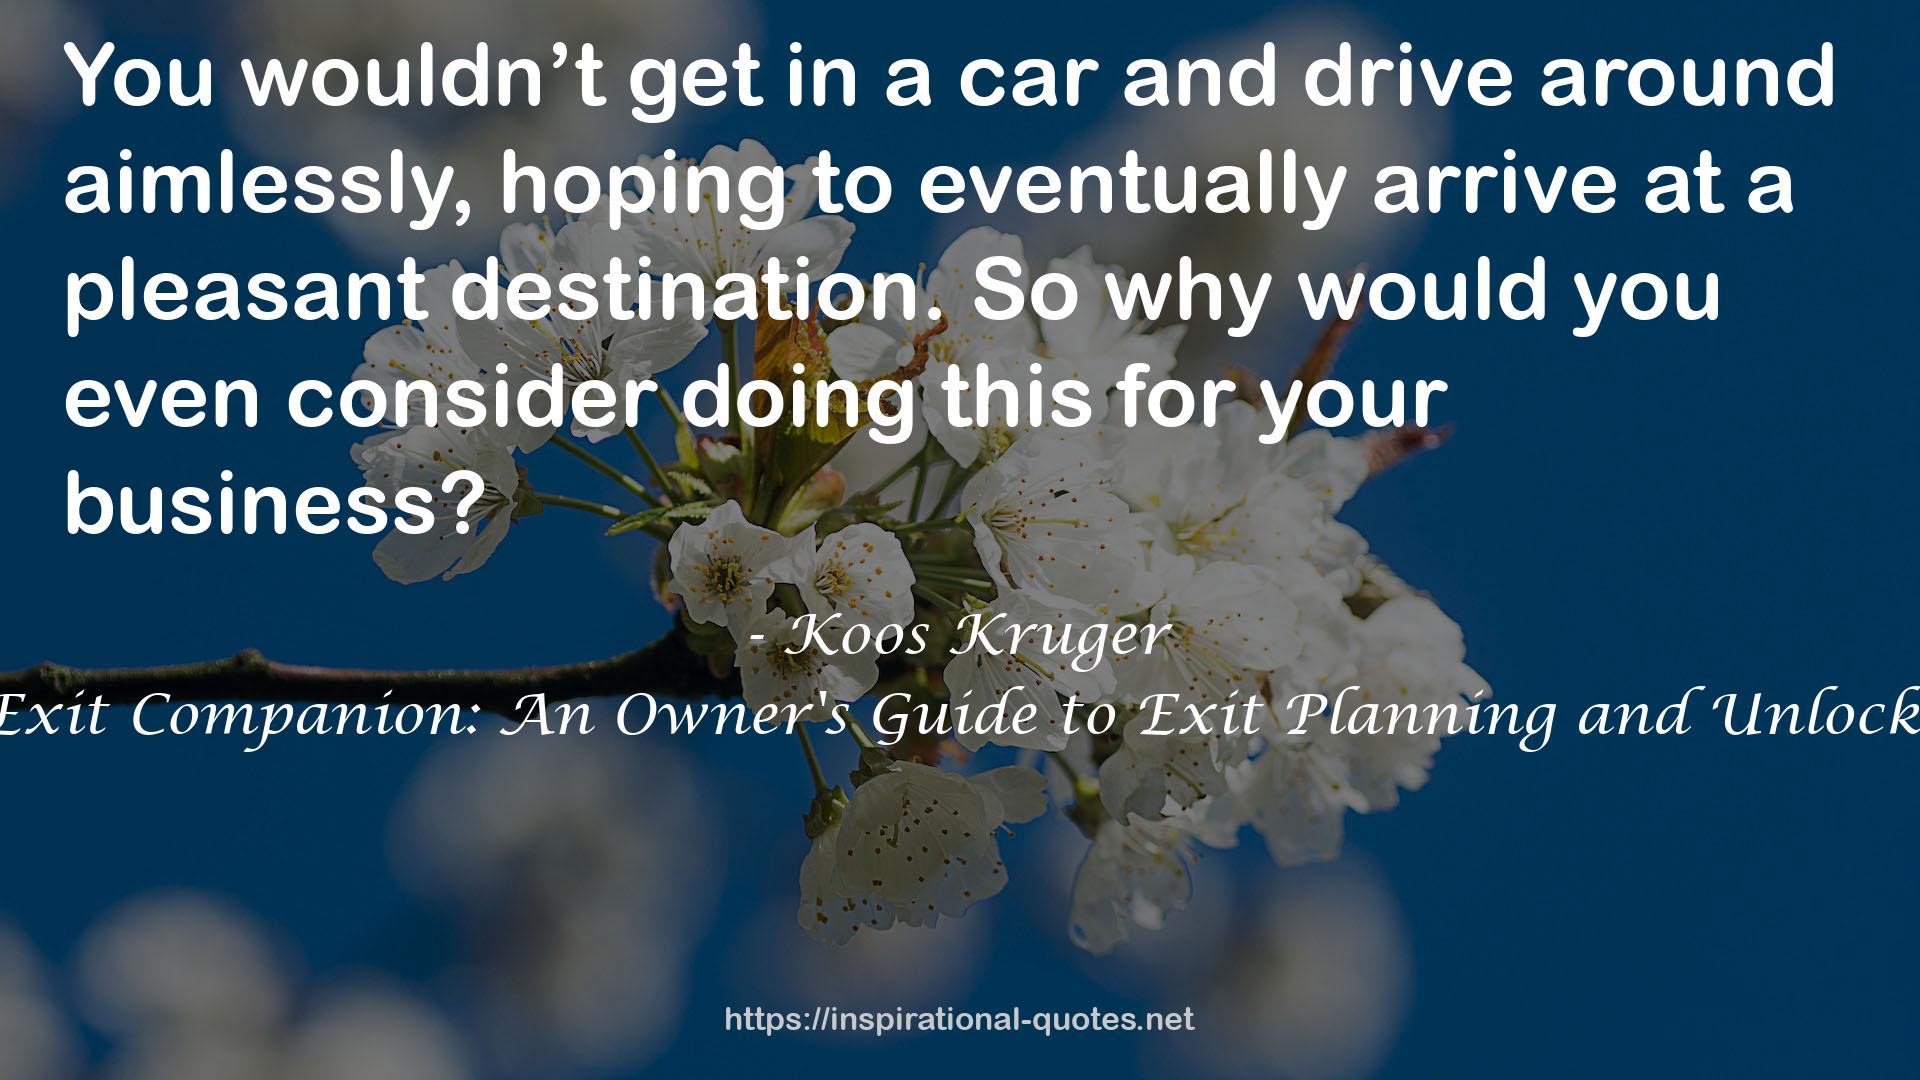 Business Exit Companion: An Owner's Guide to Exit Planning and Unlocking Value QUOTES